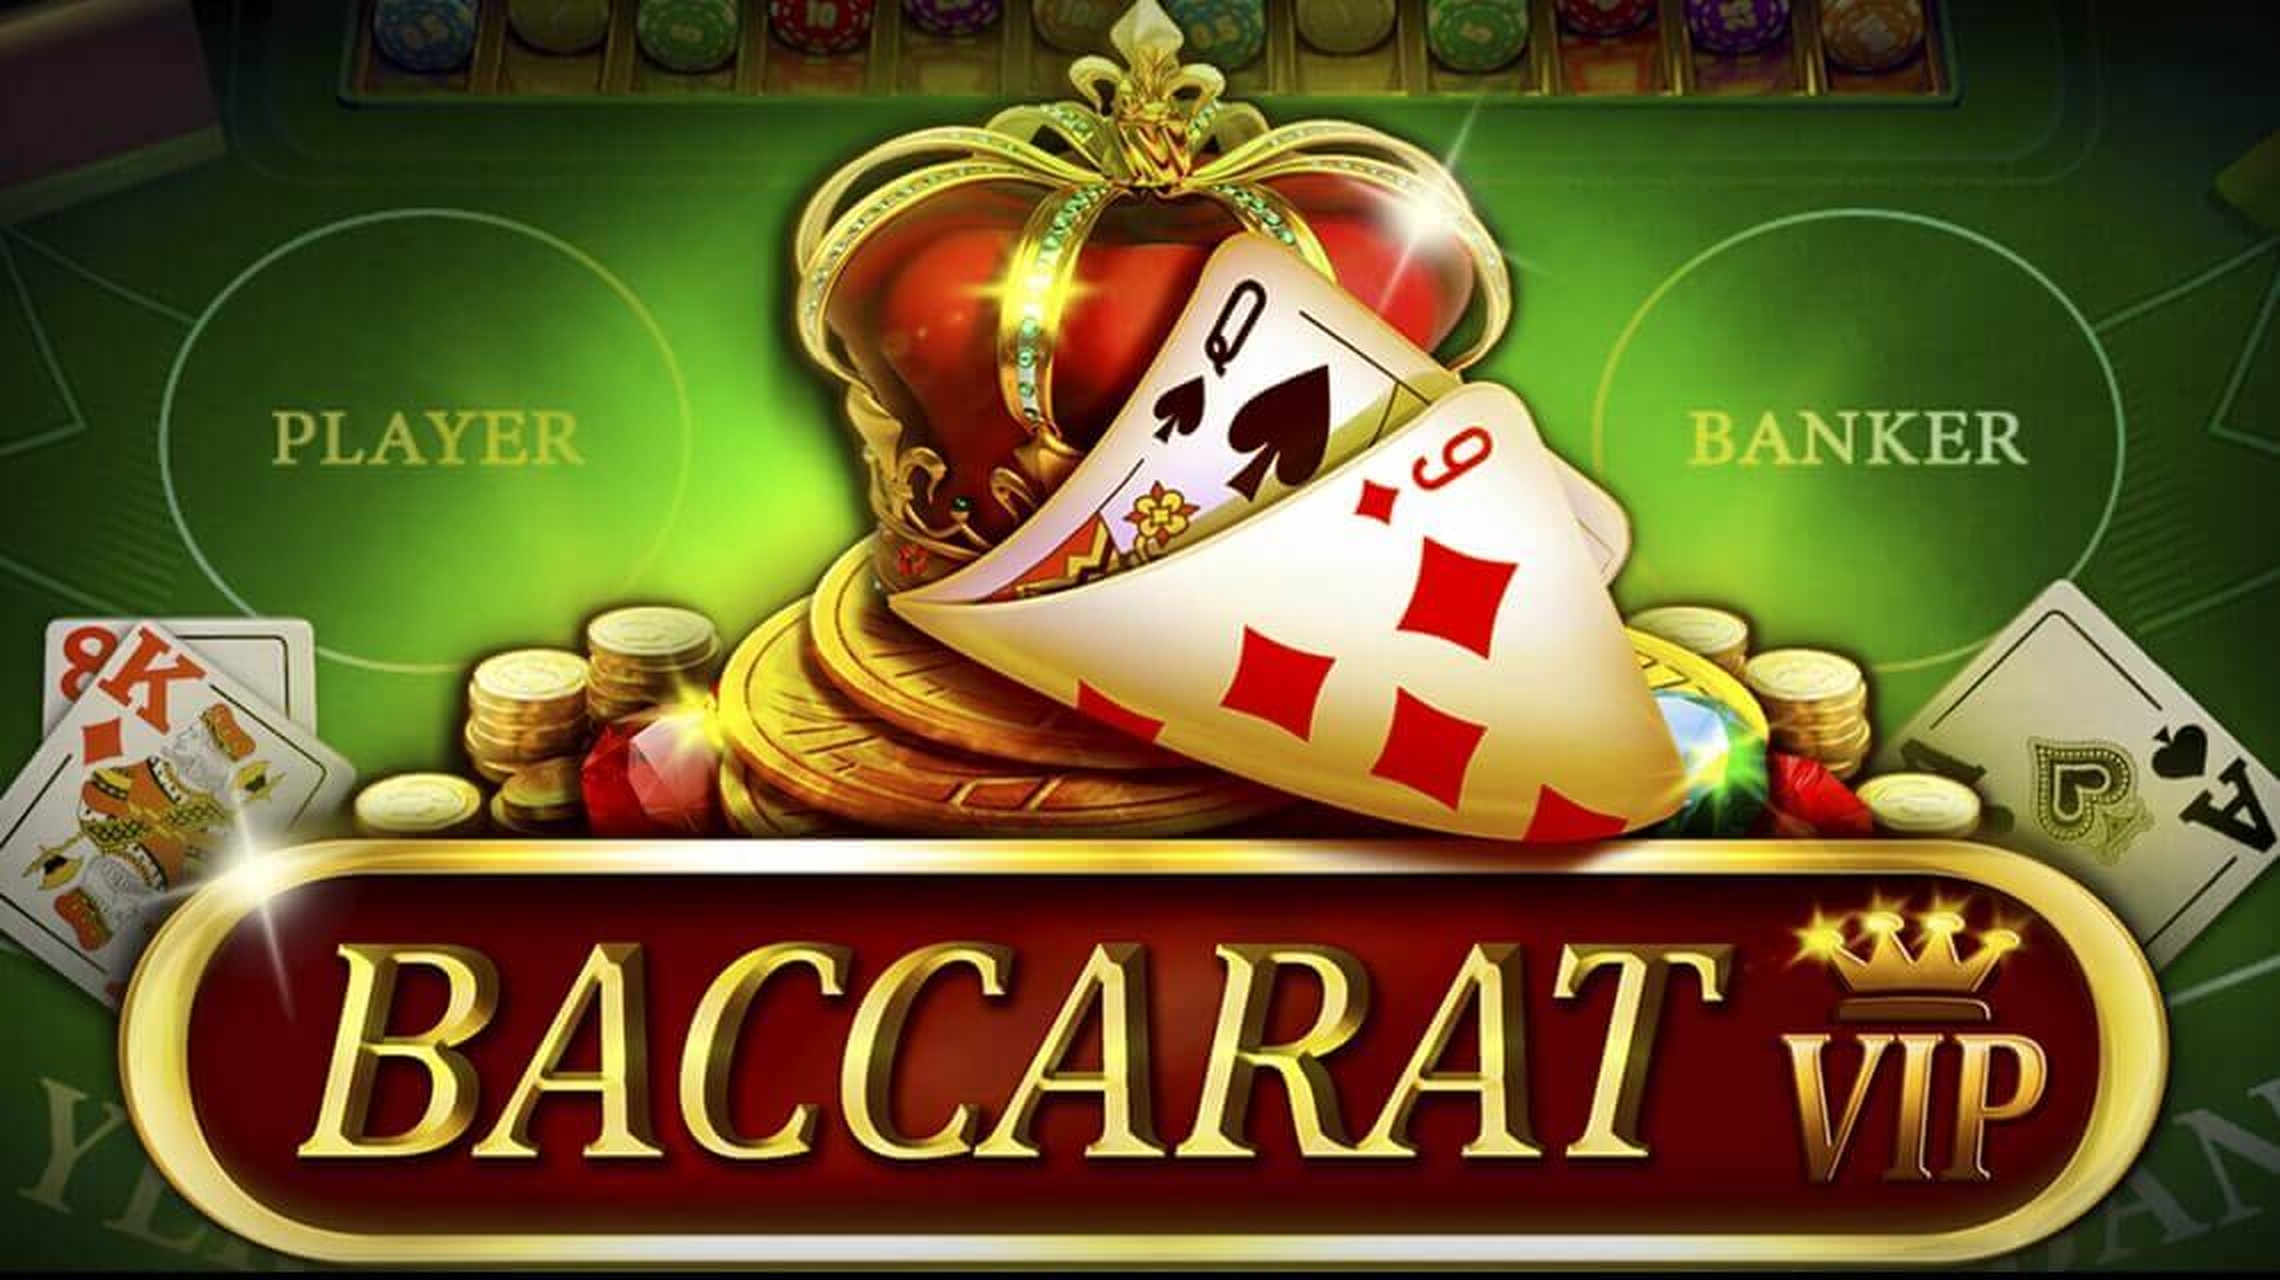 The Baccarat Online Slot Demo Game by BGAMING